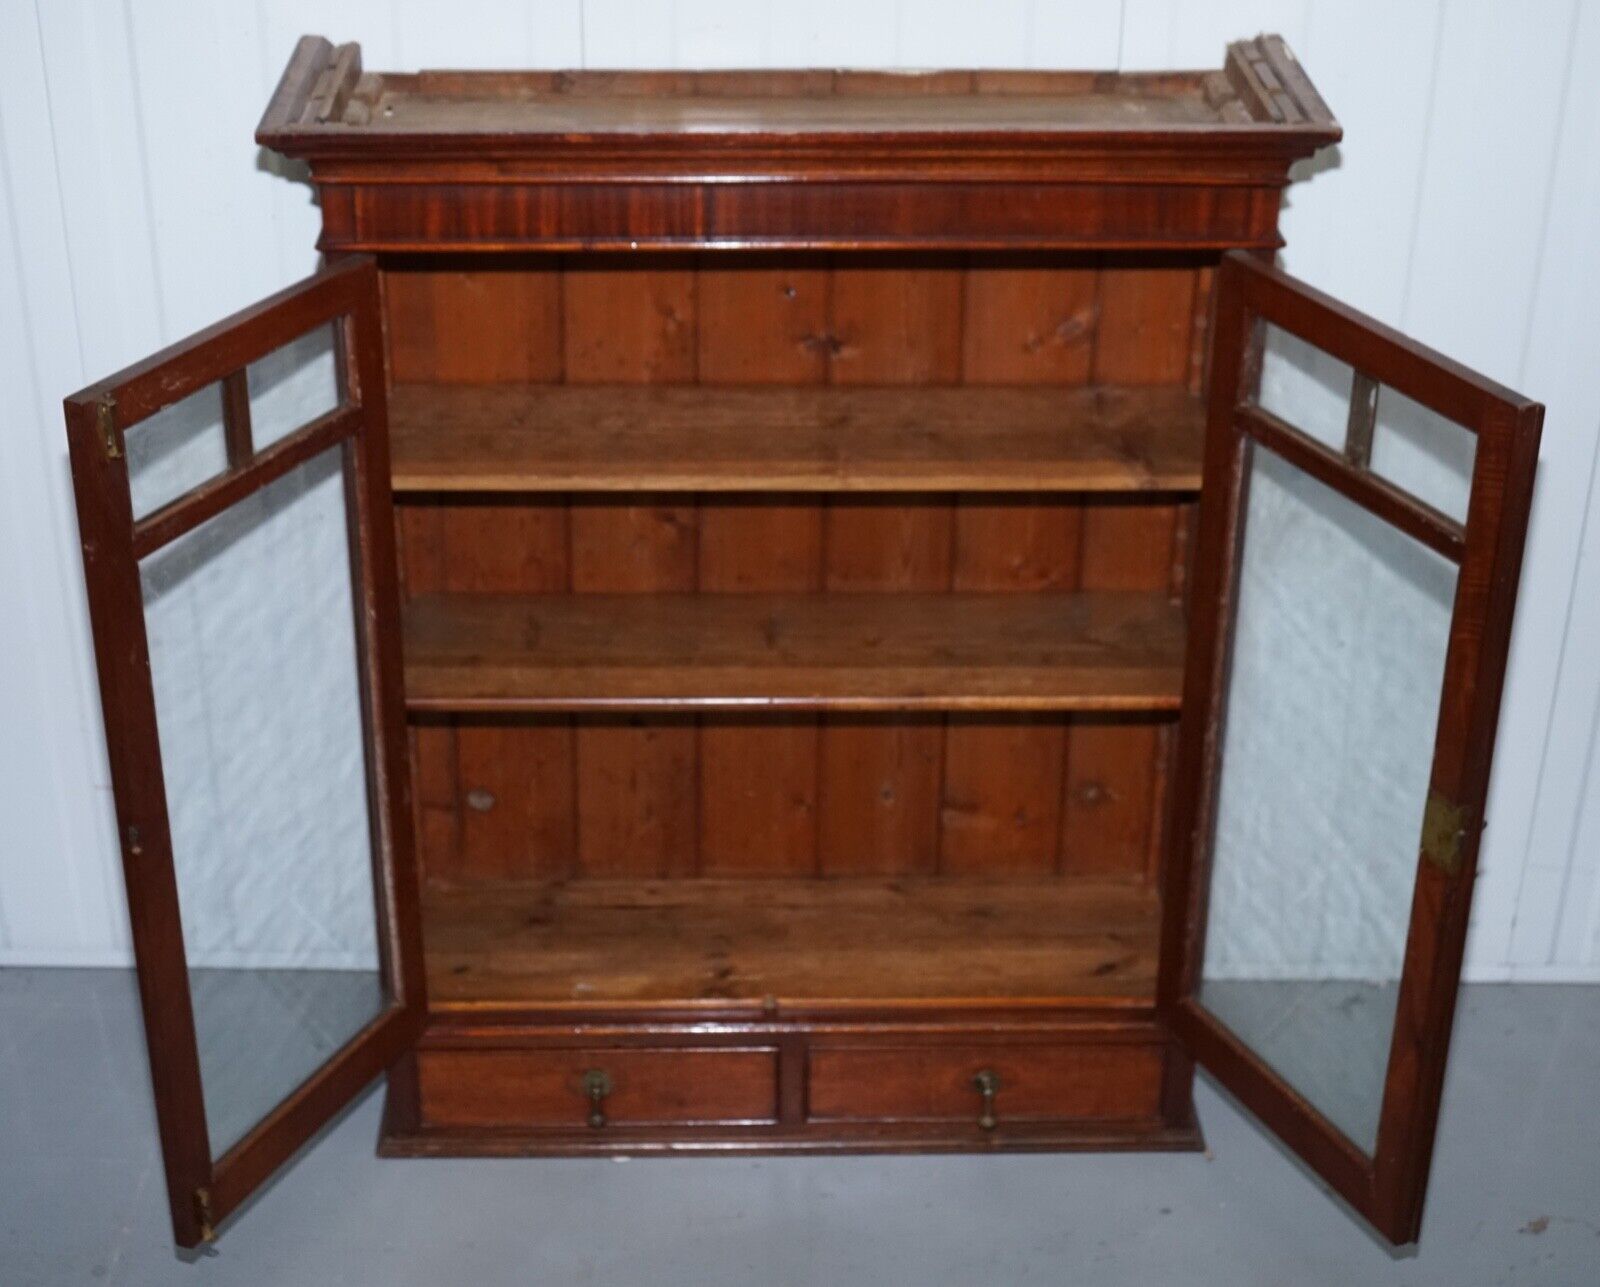 MAHOGANY LITTLE WALL BOOKCASE/CABINET WITH GLAZED DOORS